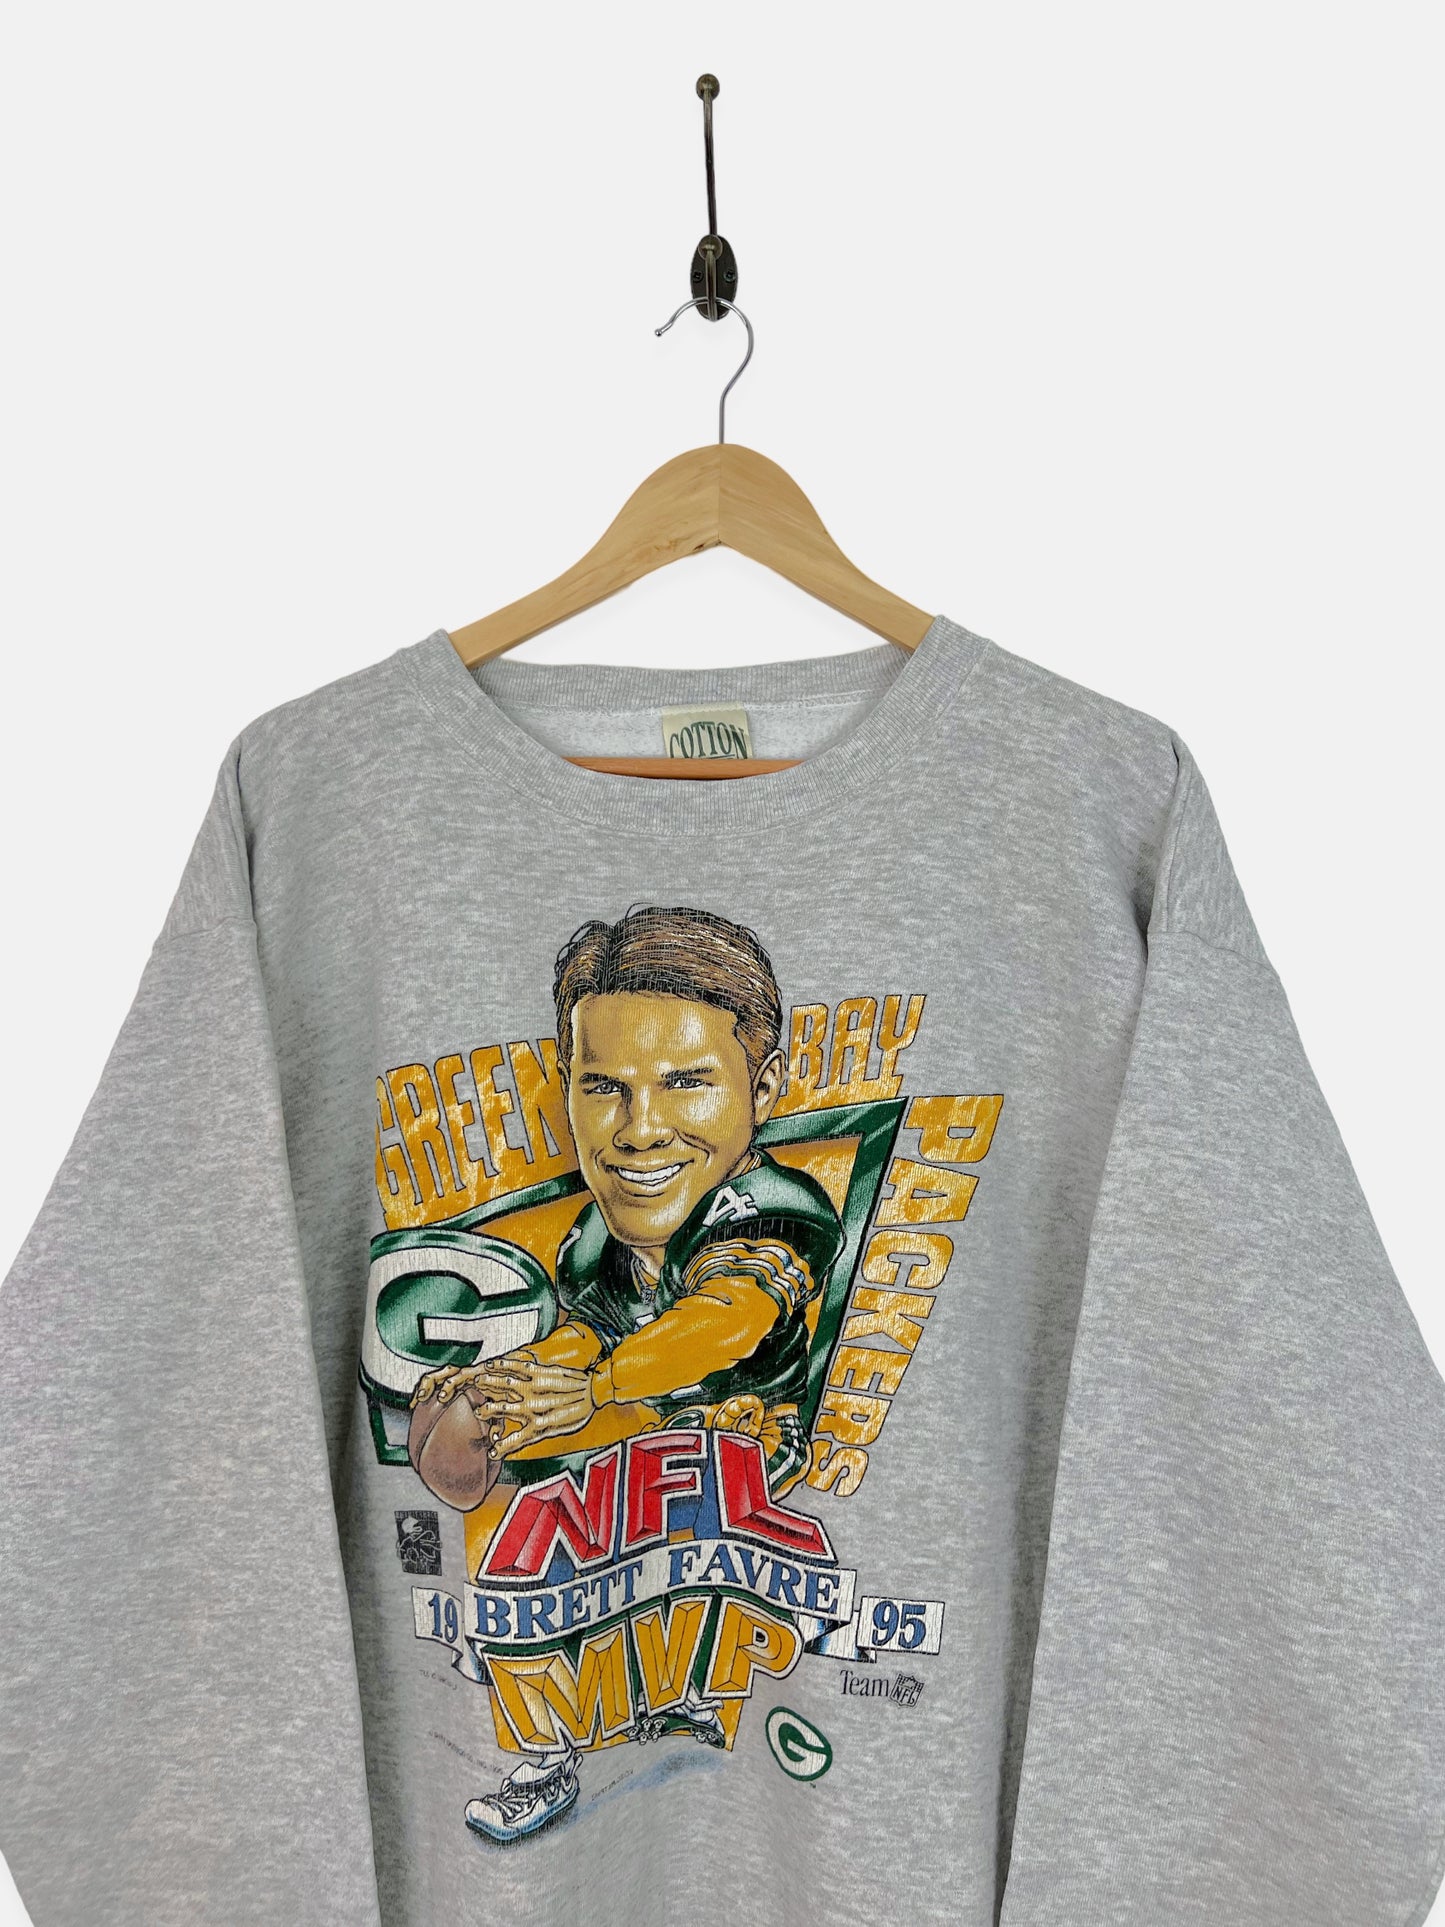 1995 Green Bay Packers NFL USA Made Vintage Sweatshirt Size 12